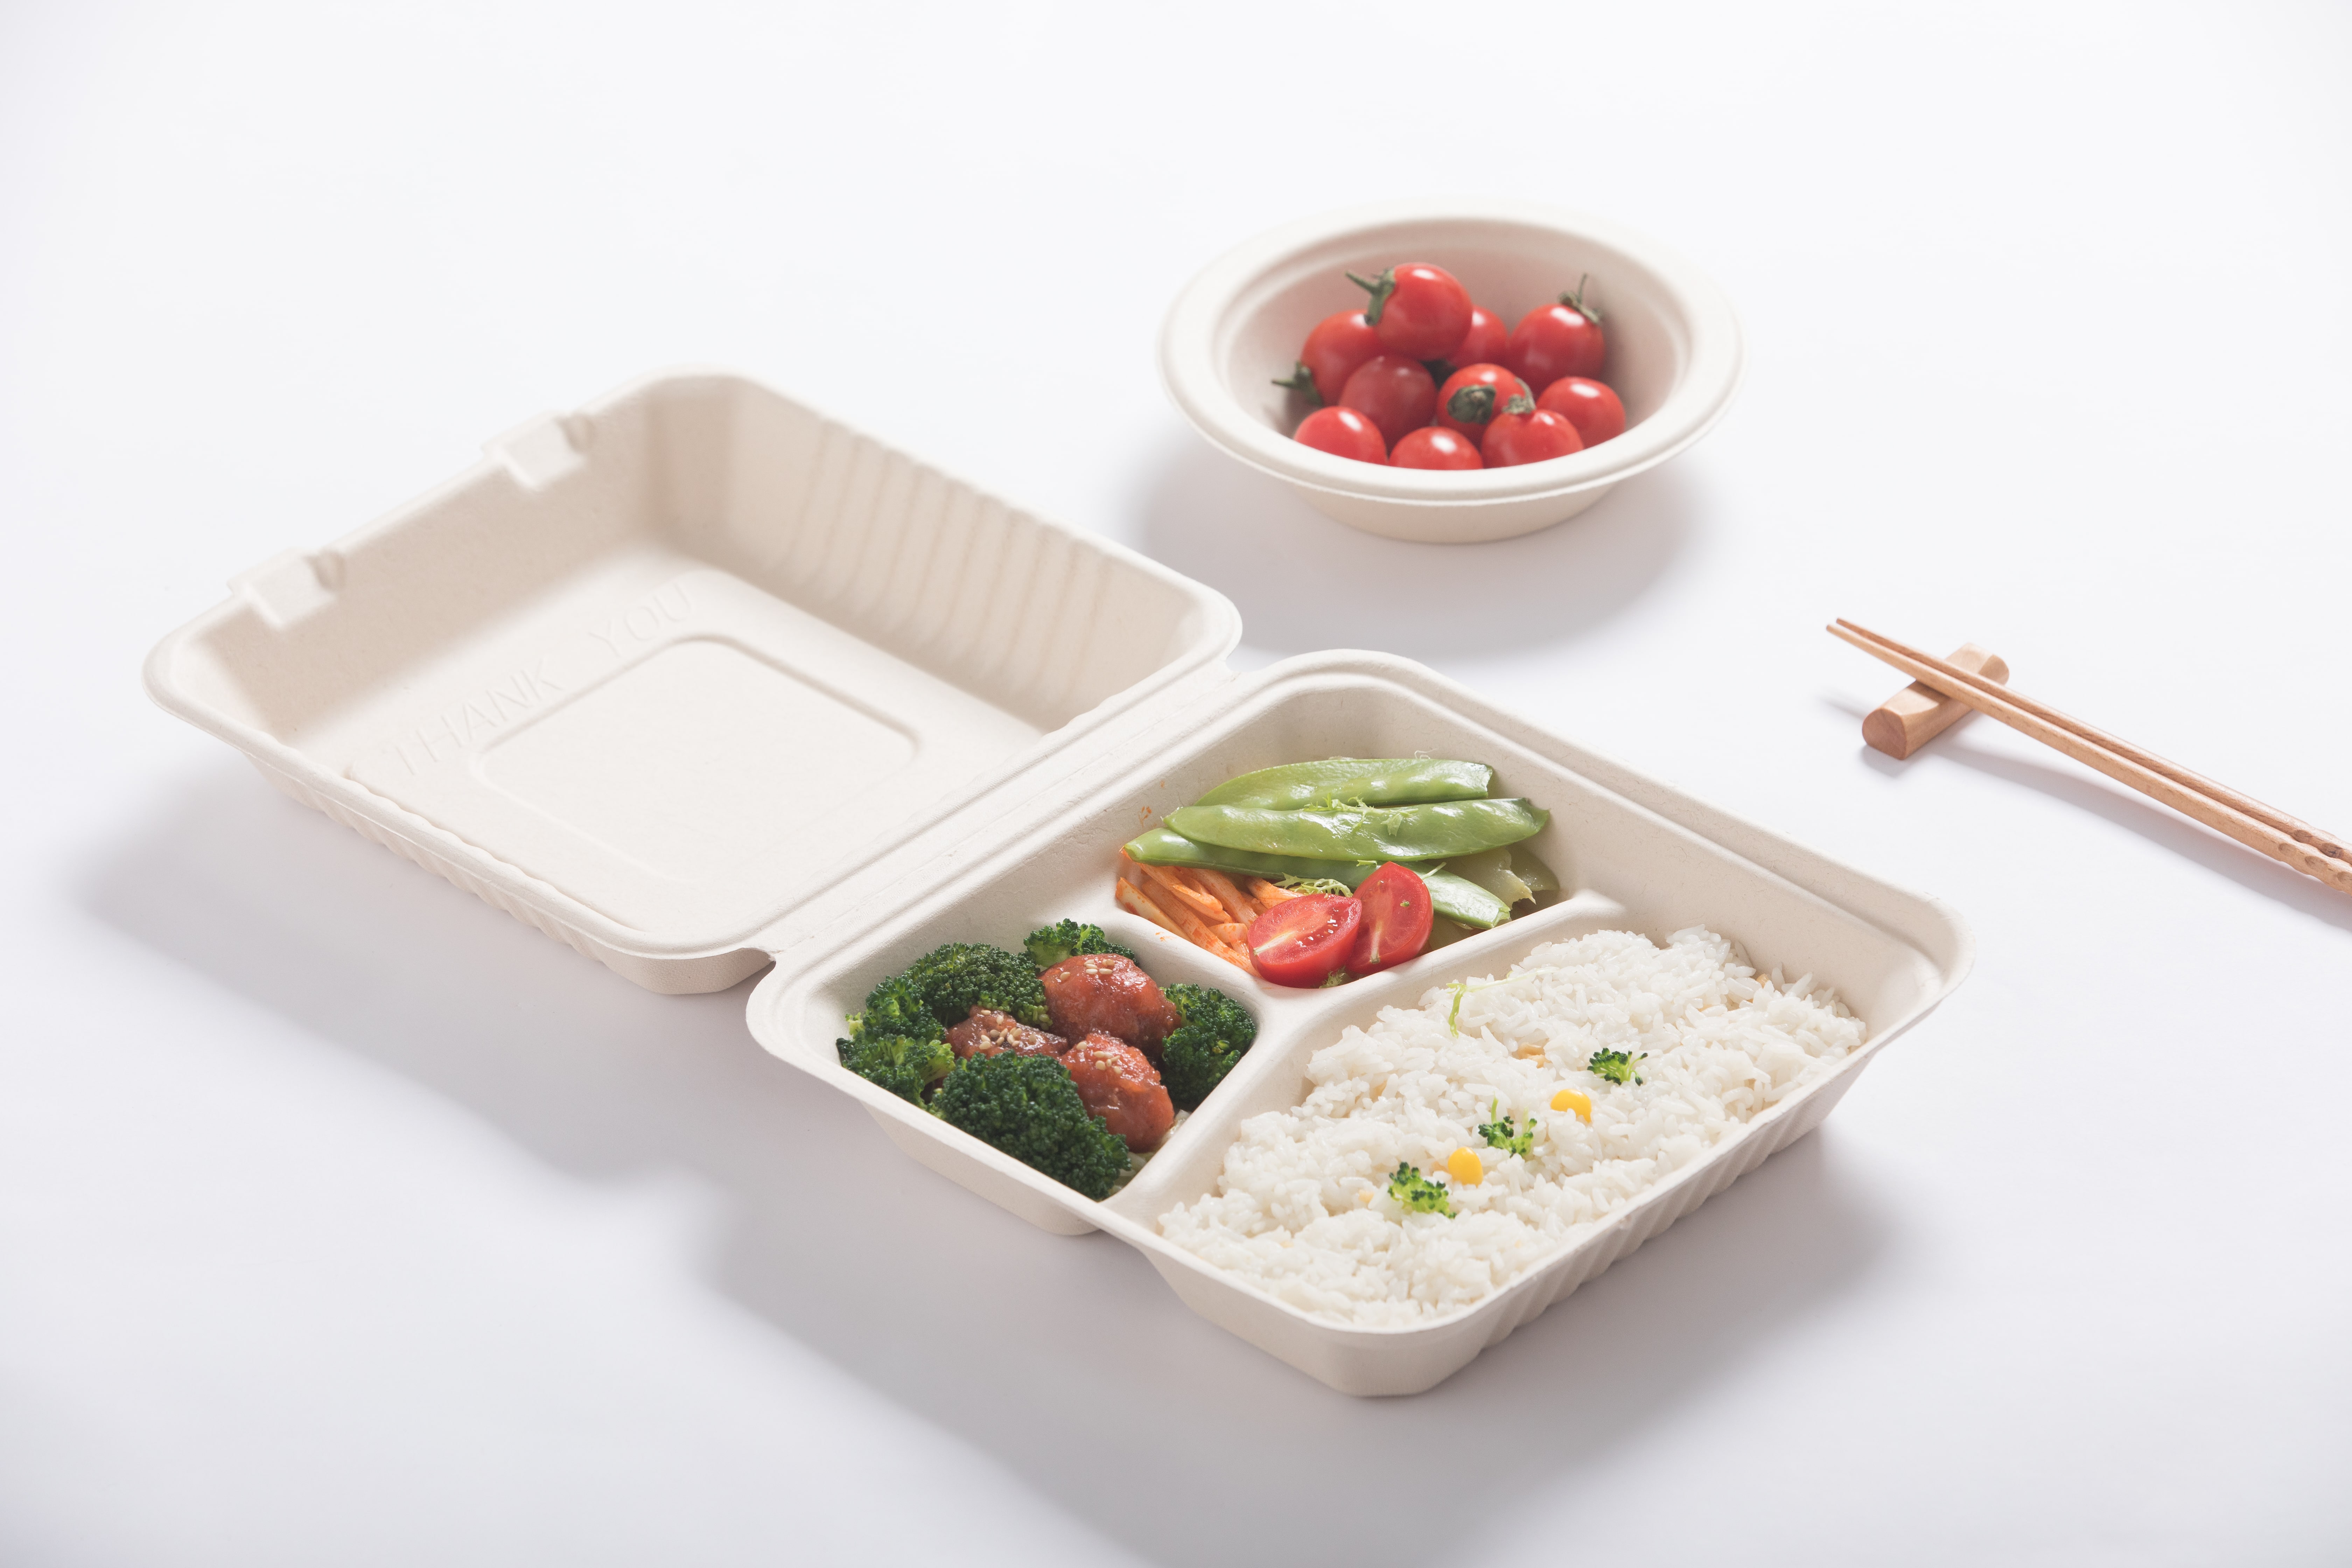 3_compartment_food_containers_disposable.jpg